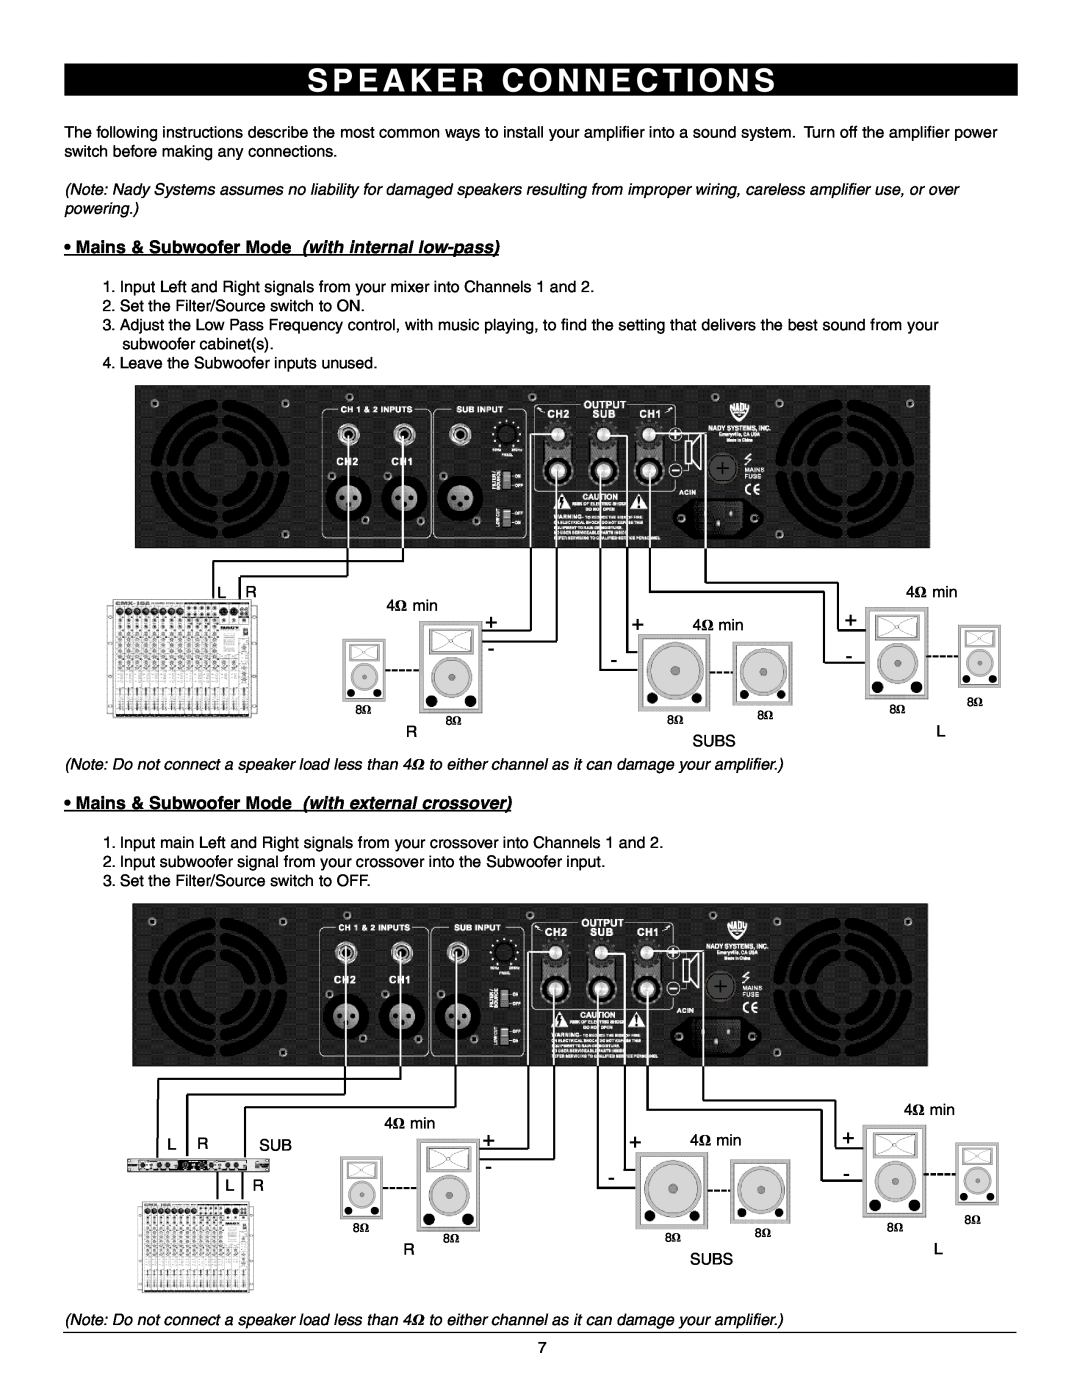 Nady Systems 3WA-1700 owner manual S P E A K E R C O N N E C T I O N S, Mains & Subwoofer Mode with internal low-pass 